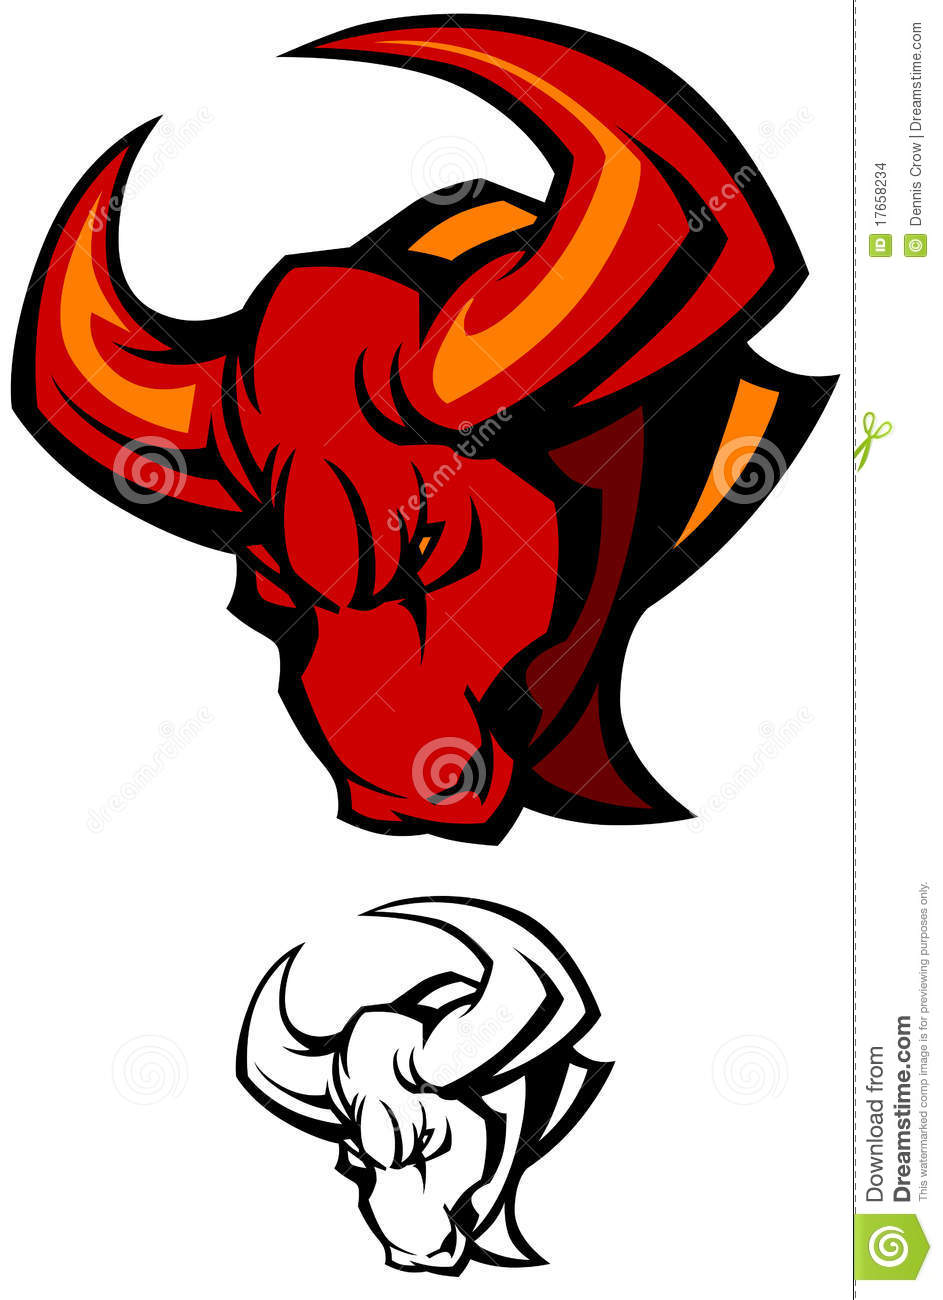 Angry Bull Logos Clipart   Cliparthut   Free Clipart